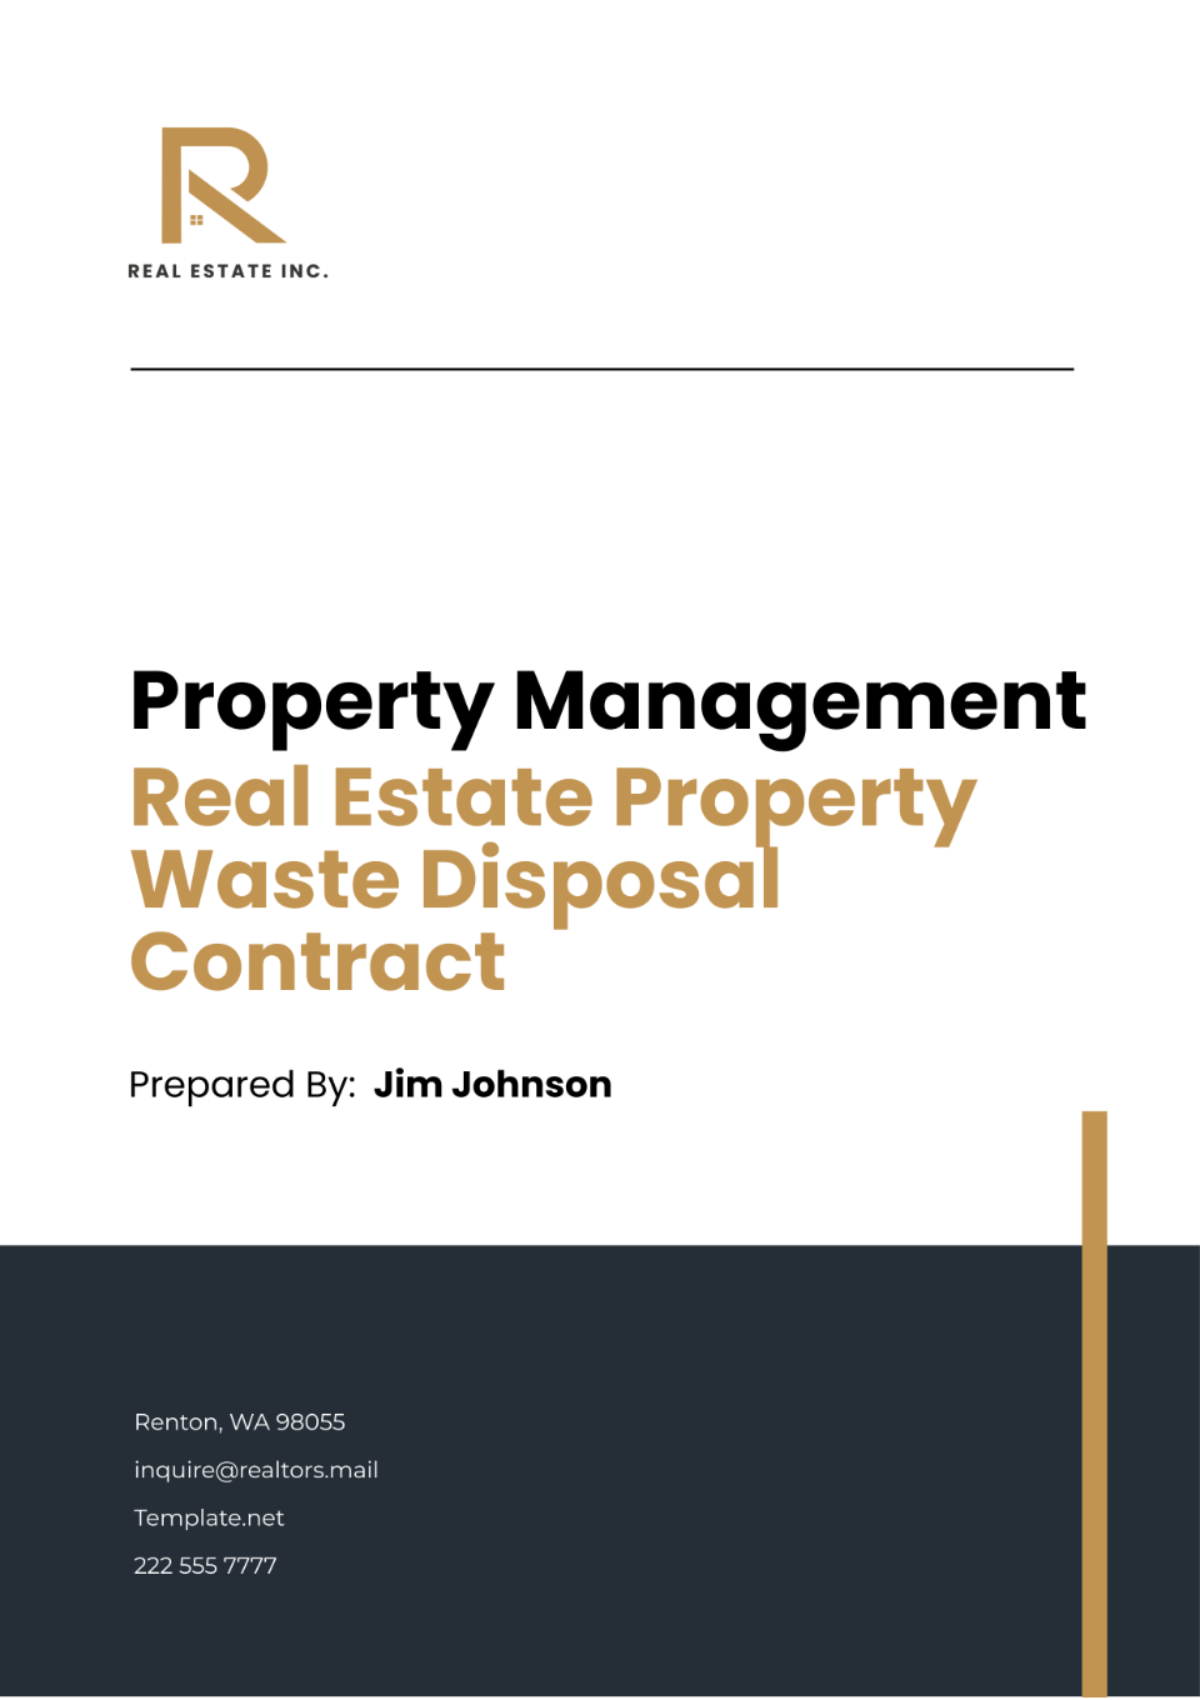 Real Estate Property Waste Disposal Contract Template